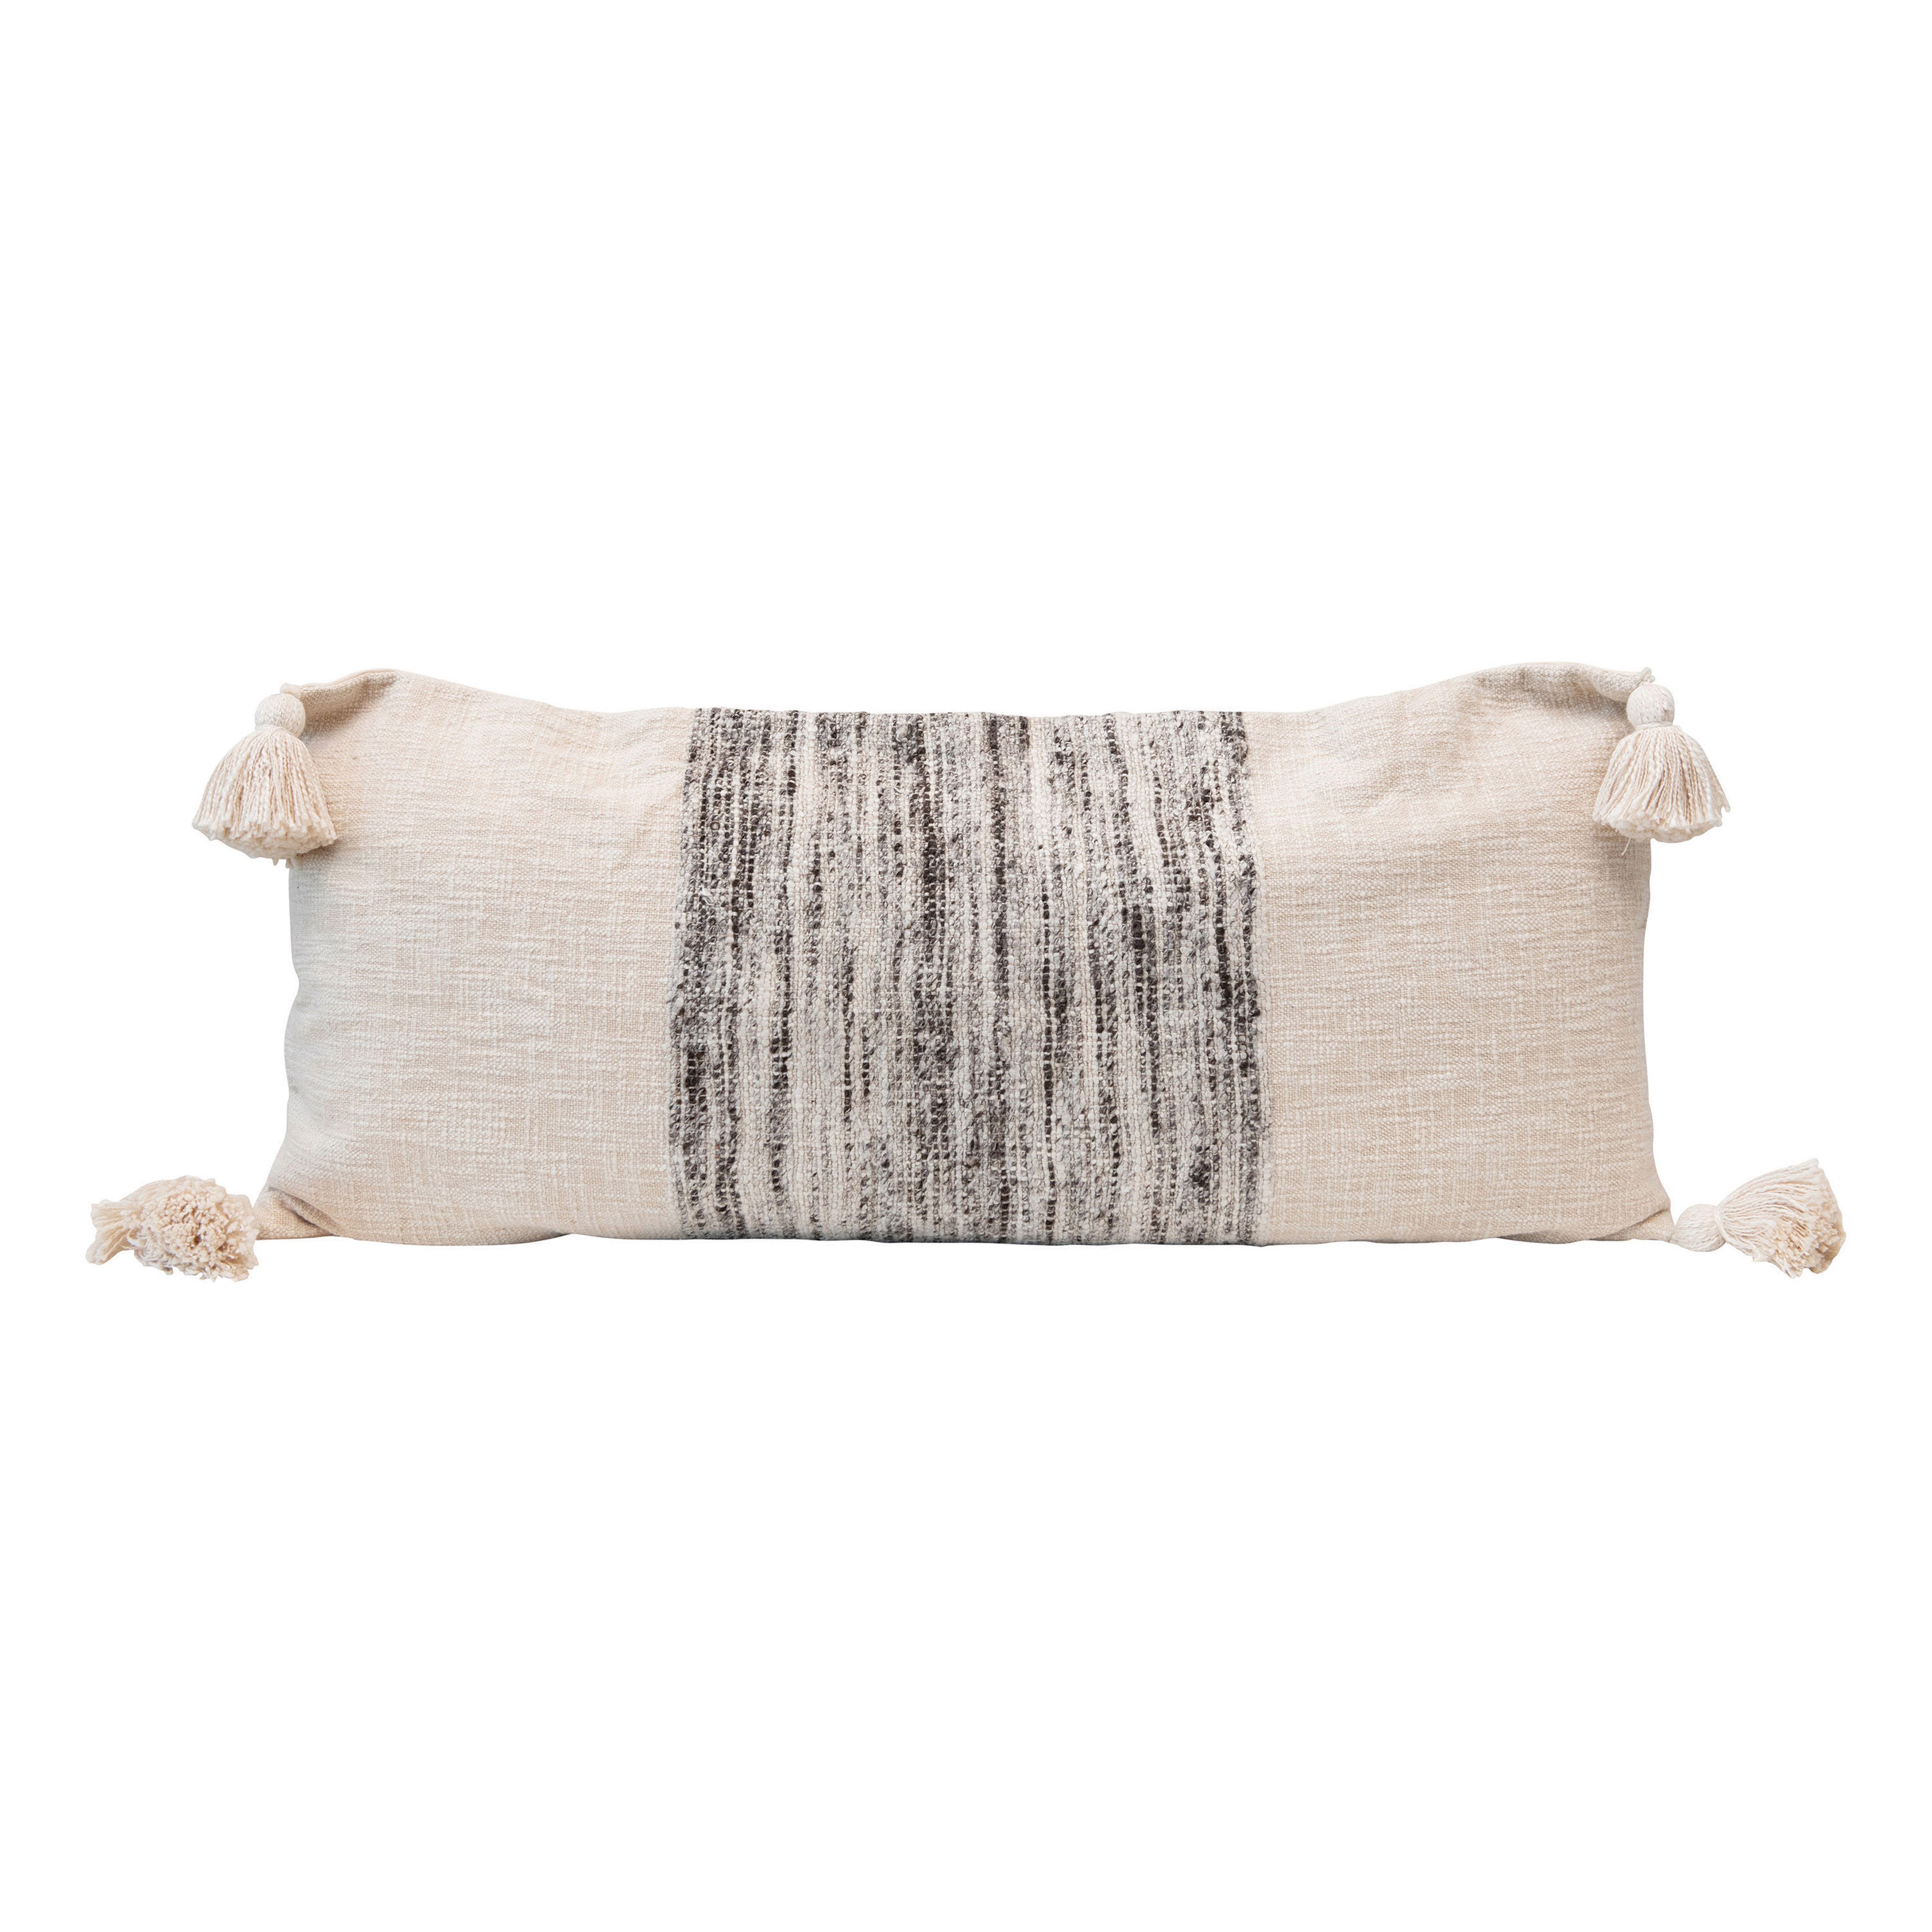 Woven Cotton Blend Lumbar Pillow with Variegated Grey Yarns & Tassels, Cream Color - Nomad Home